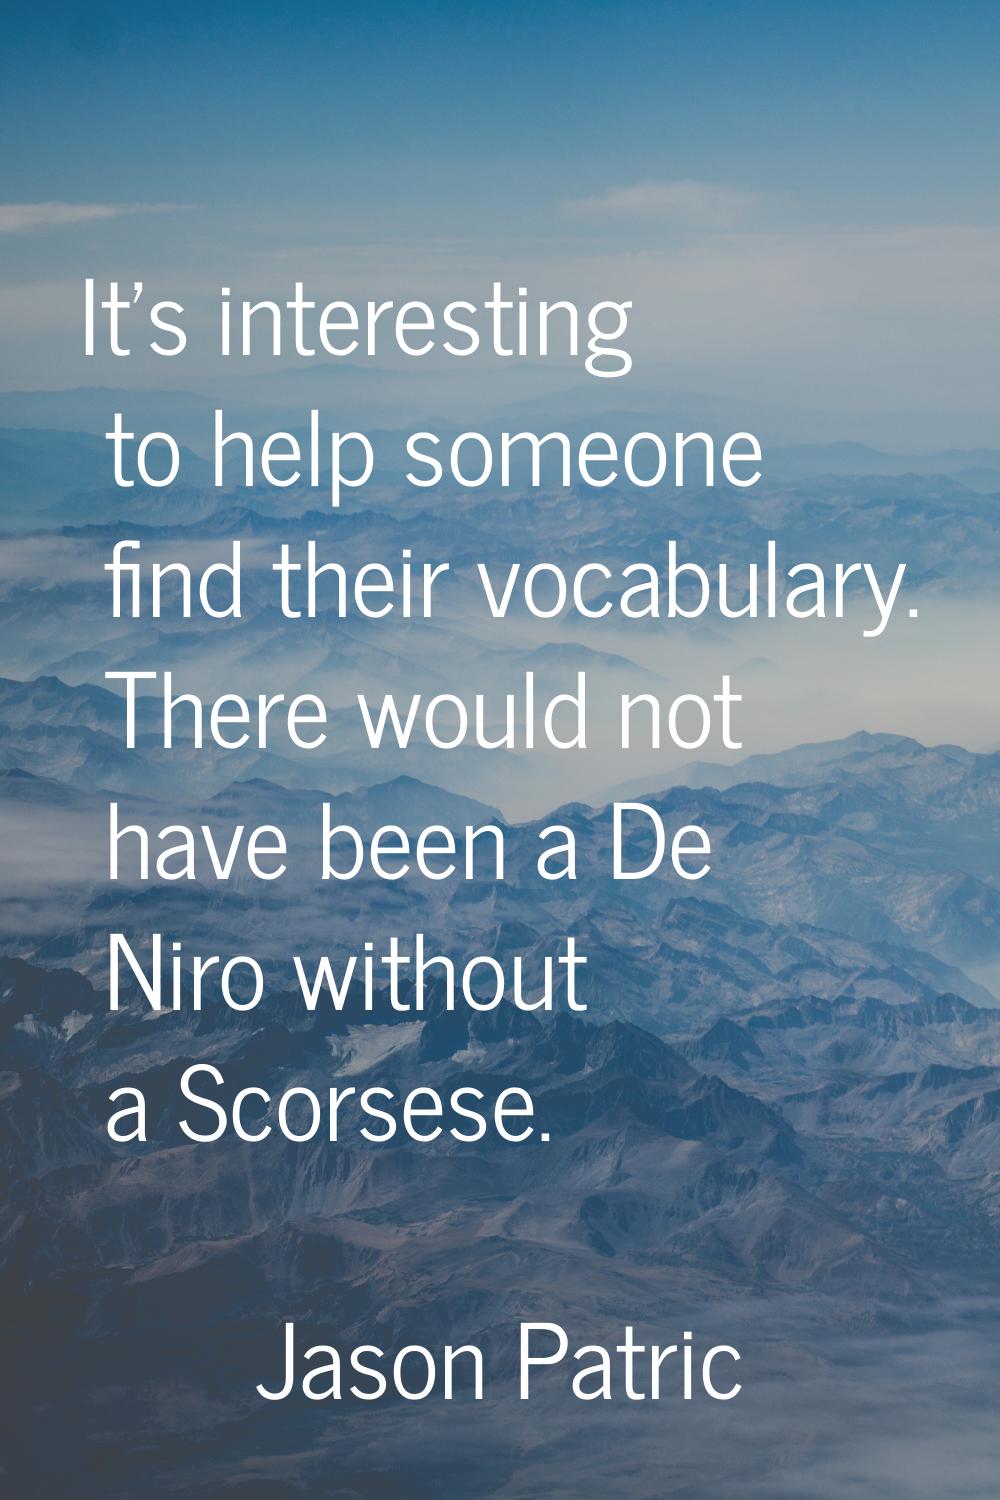 It's interesting to help someone find their vocabulary. There would not have been a De Niro without